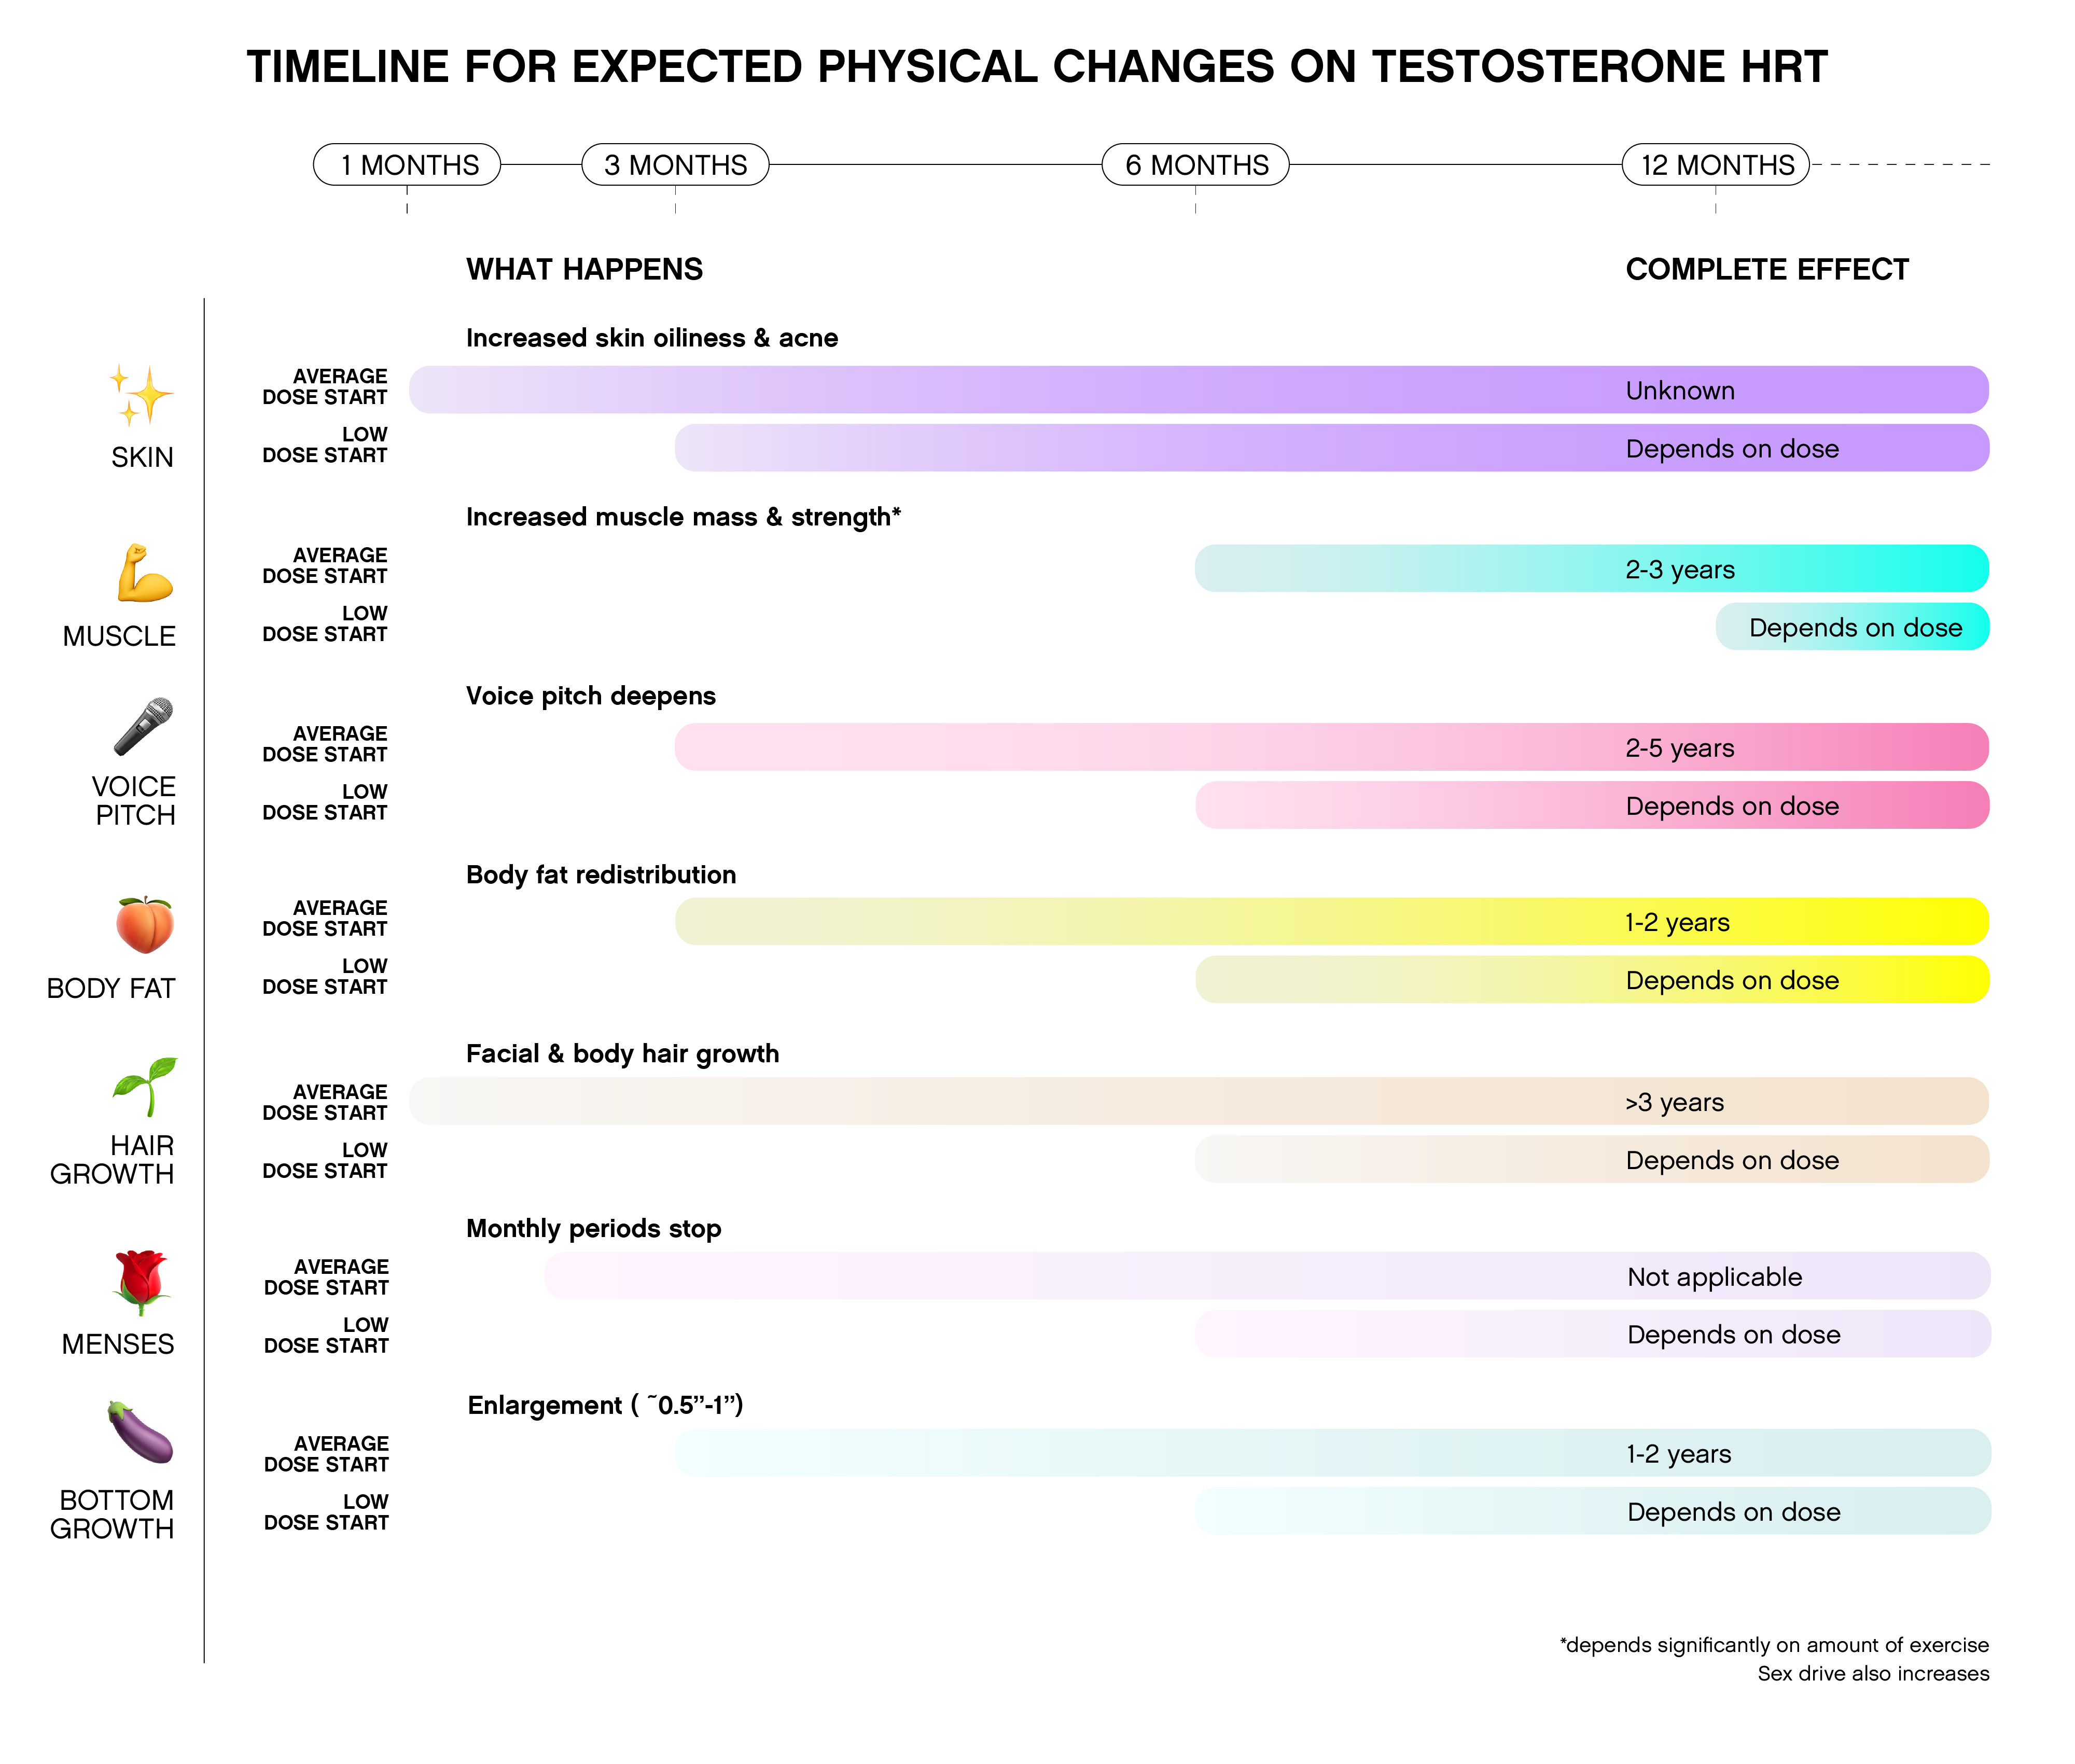 Timeline of changes on testosterone HRT